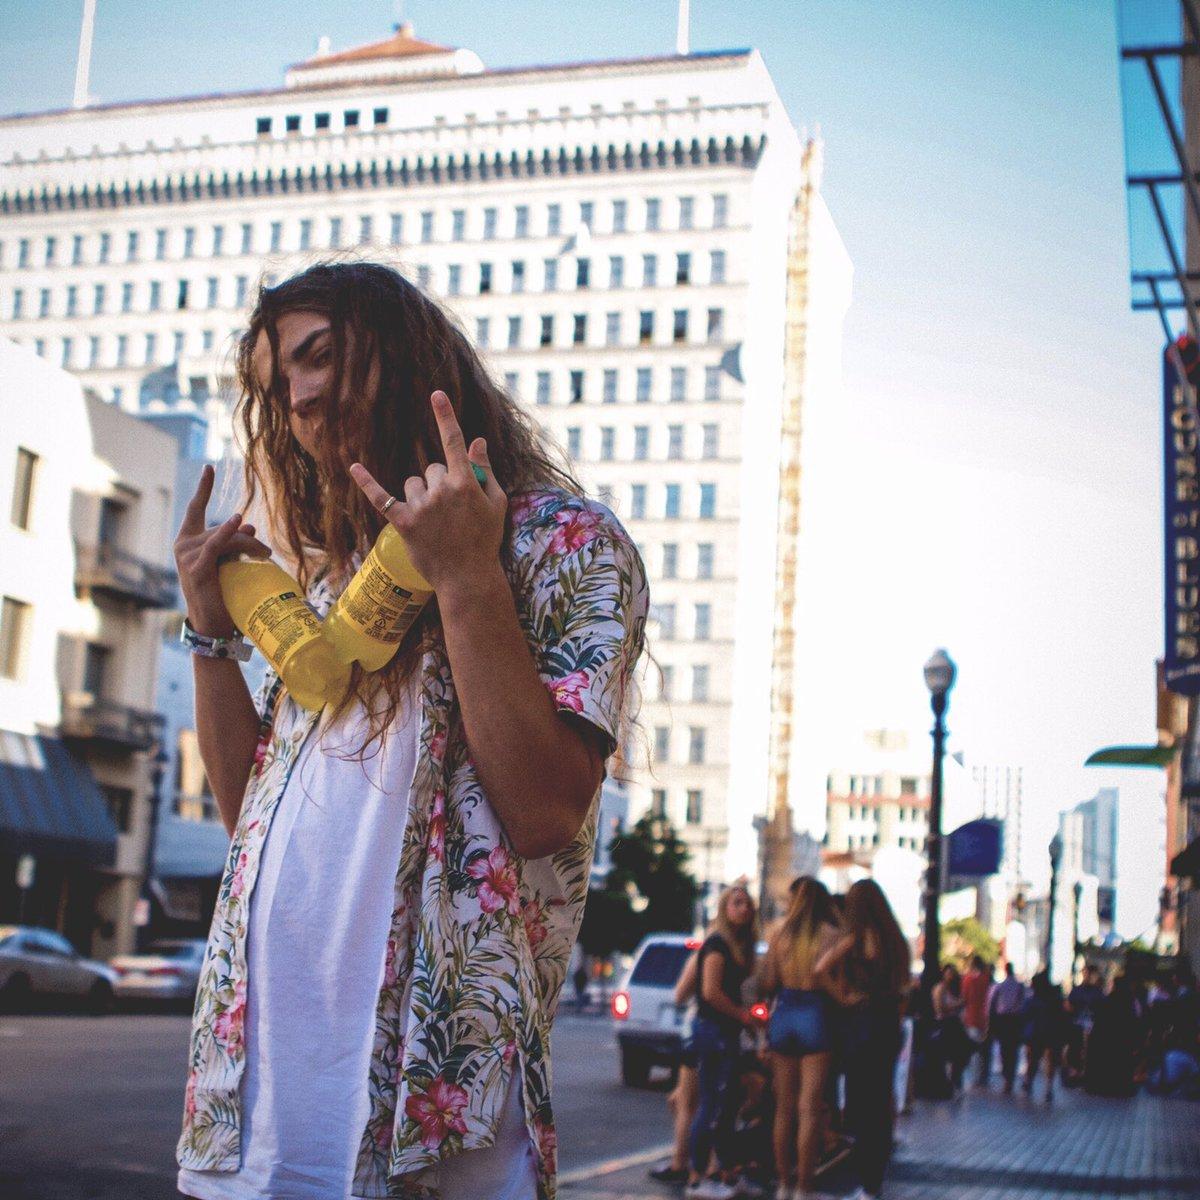 Yung Pinch on Twitter: till next time y'all, LA tomorrow. 